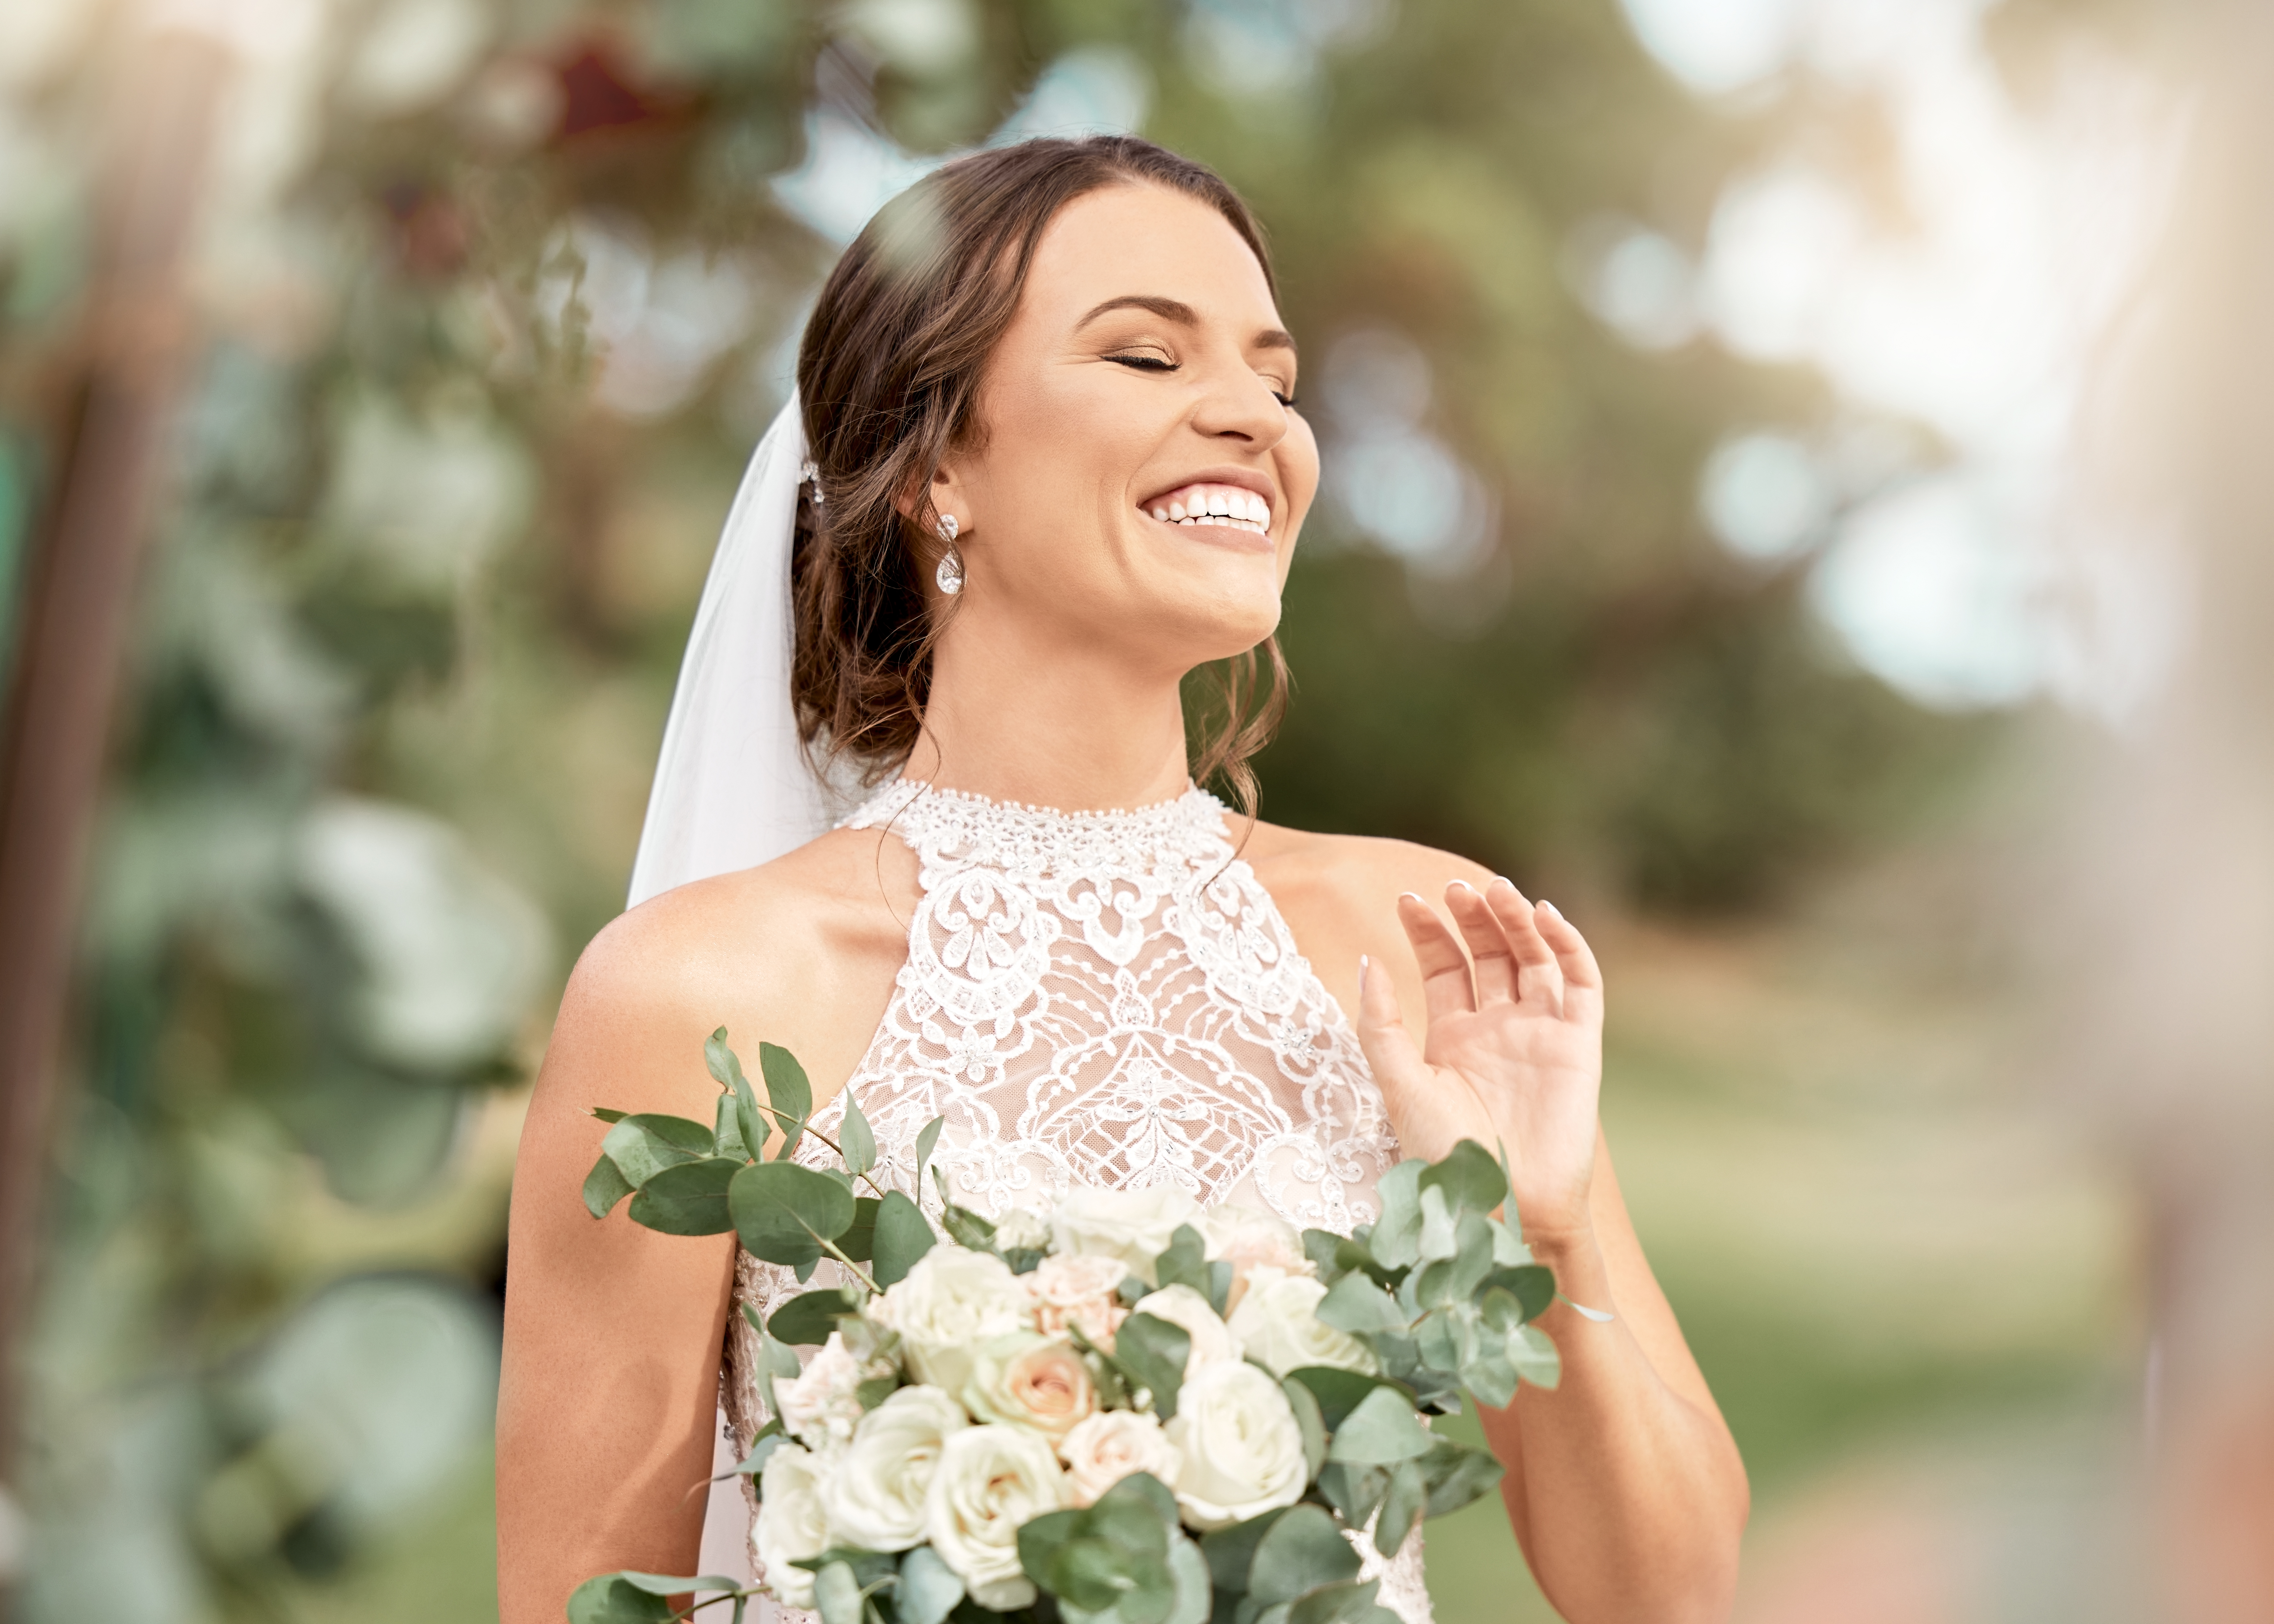 Excited bride in wedding with bouquet in nature park with green trees, bokeh and summer sunshine. Happiness, commitment and dream of a beauty woman with flowers for marriage in outdoor lens flare | Source: Getty Images